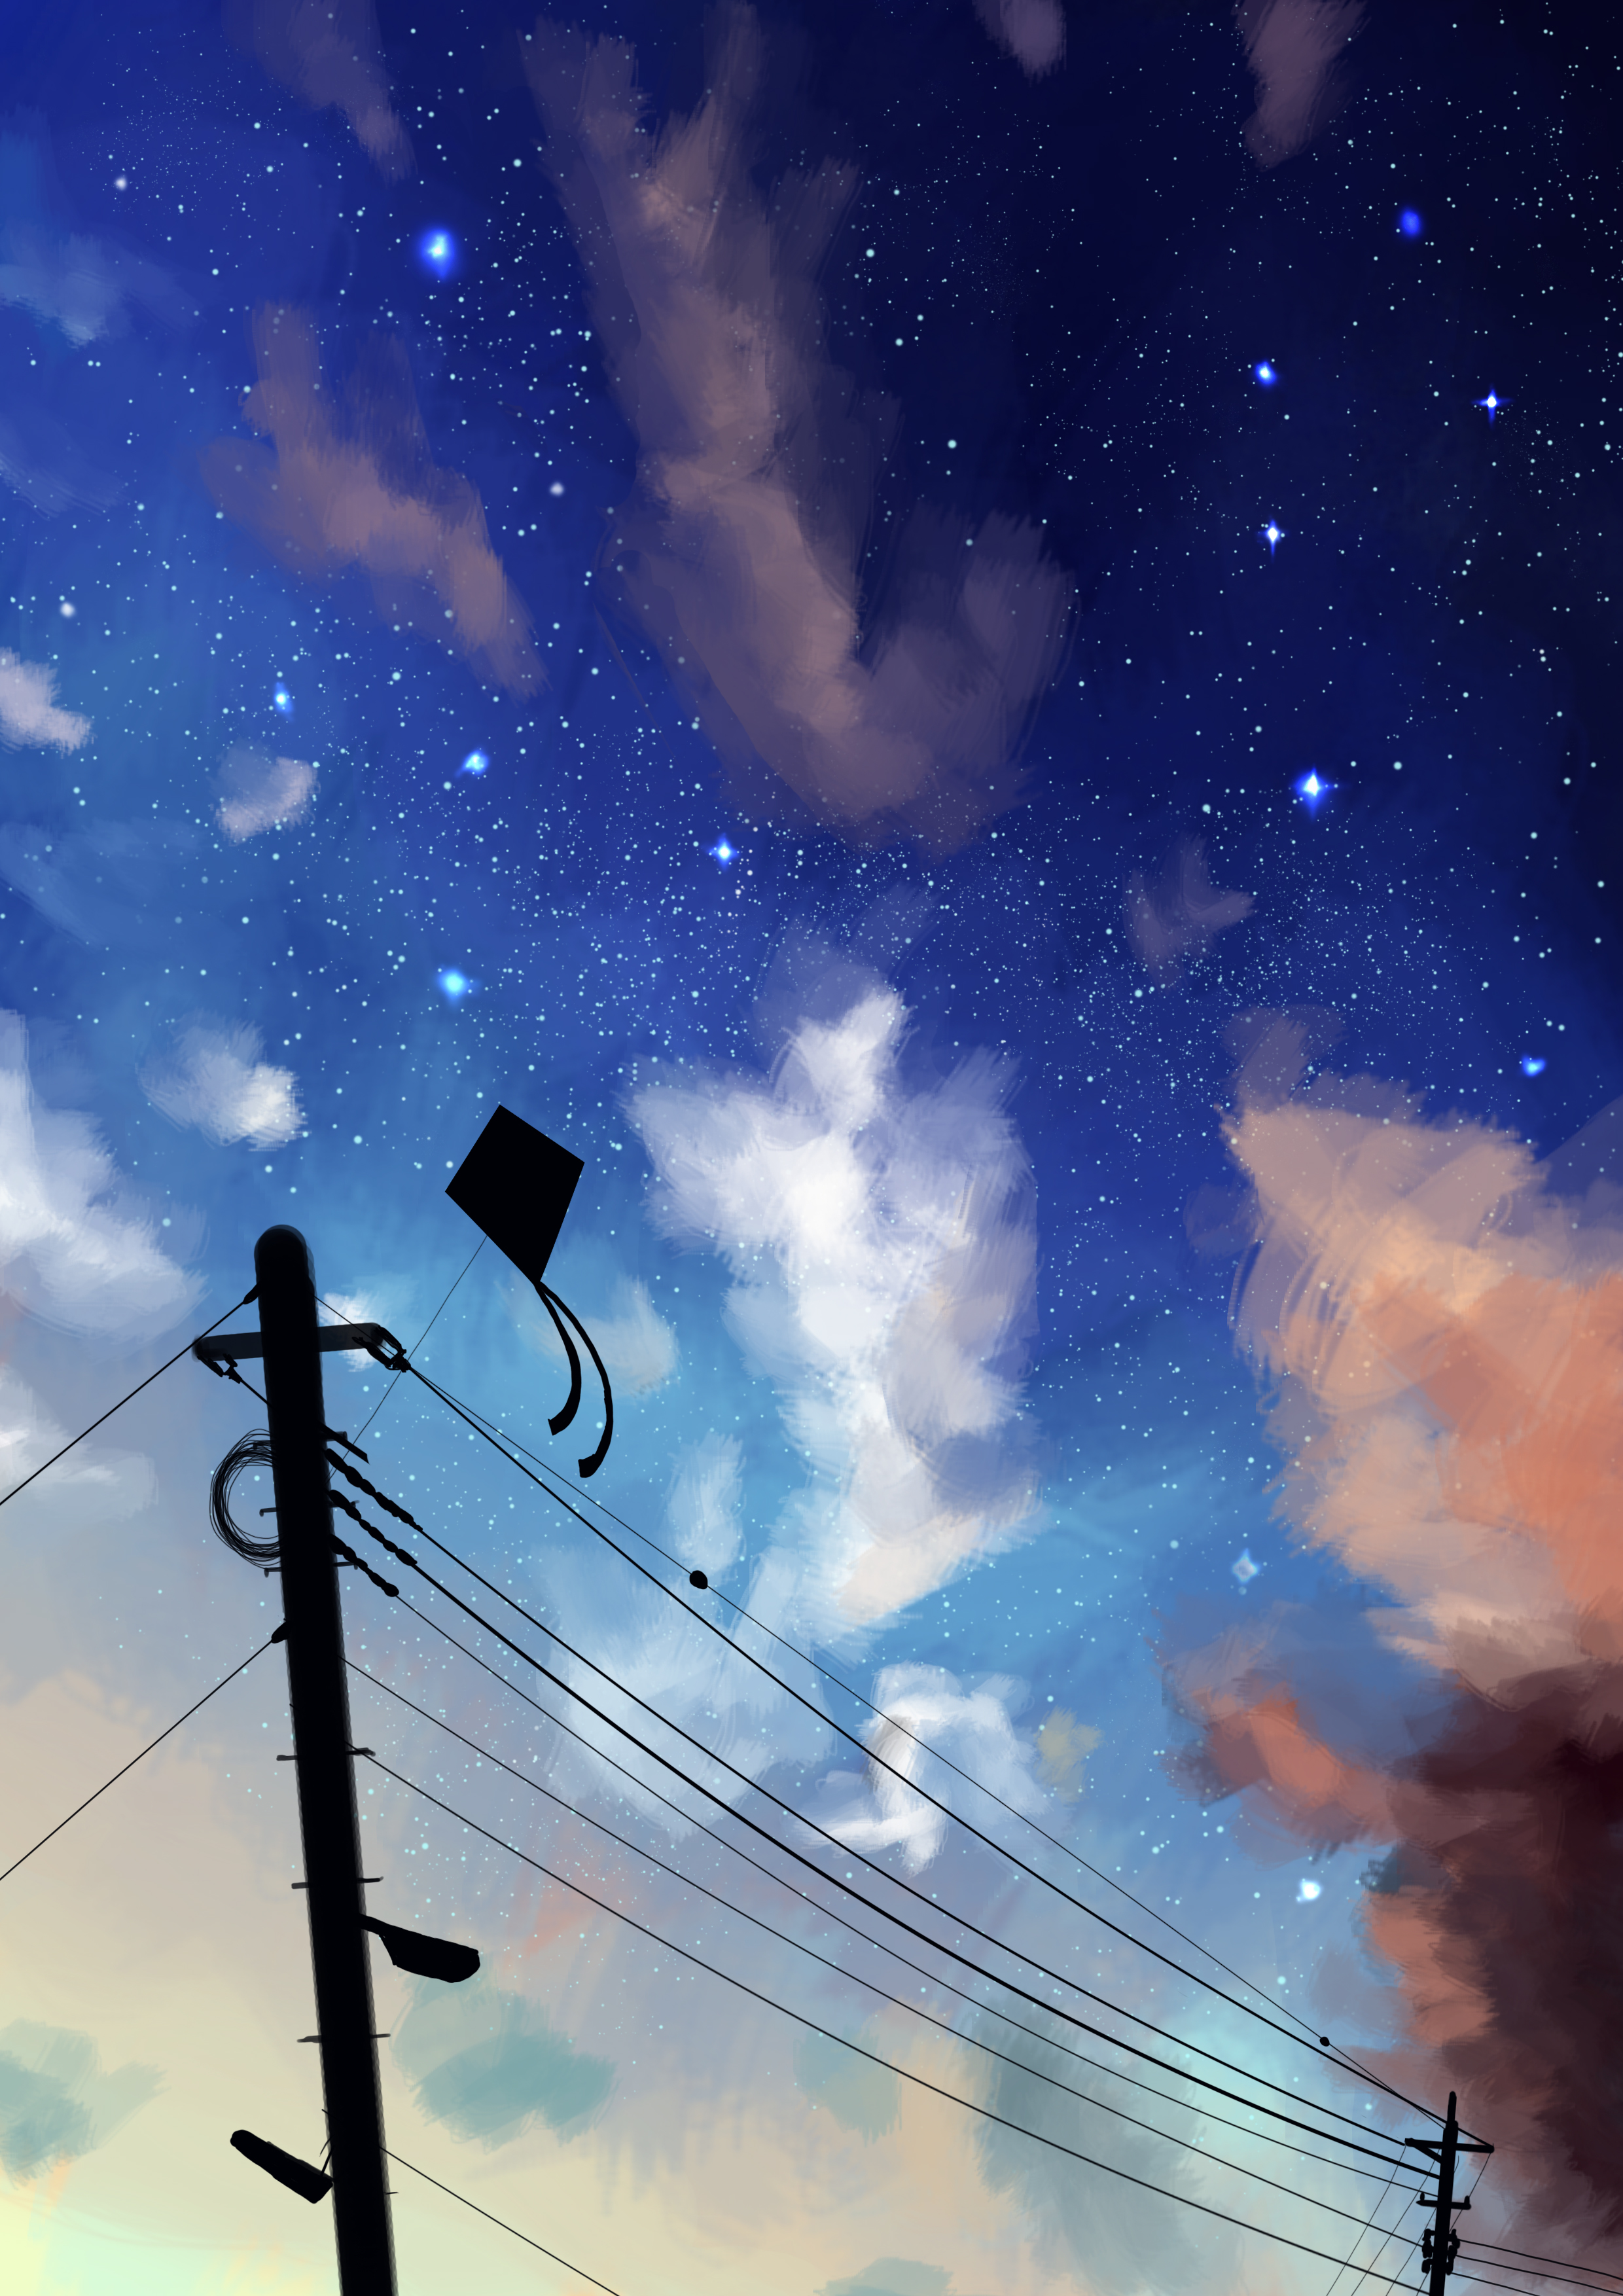 wallpapers night, sky, art, clouds, wires, wire, kite